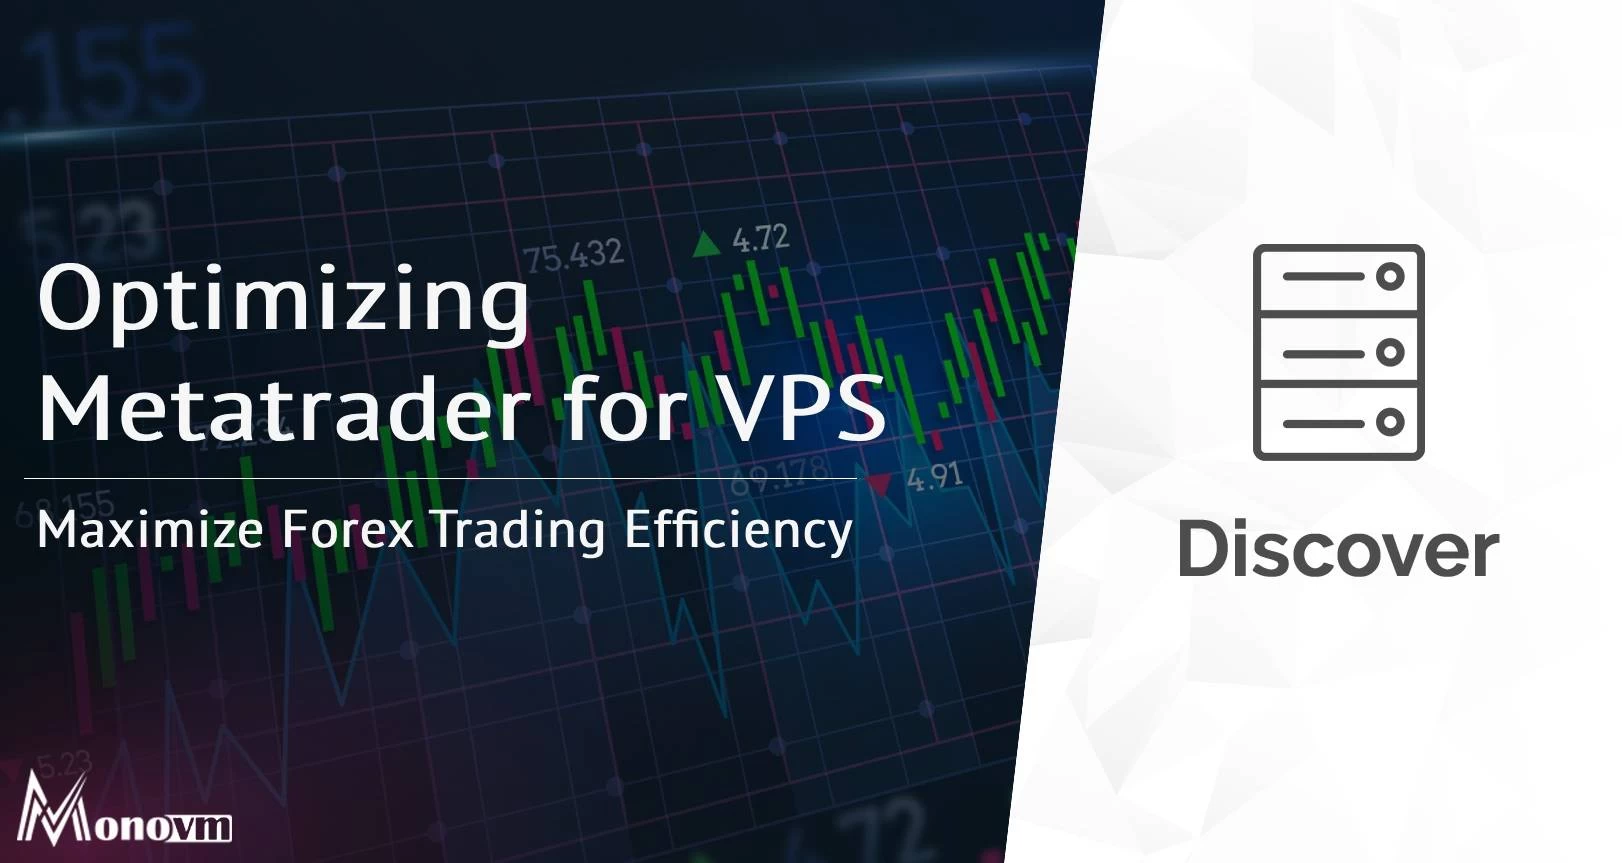 How to Optimize Metatrader for Forex VPS